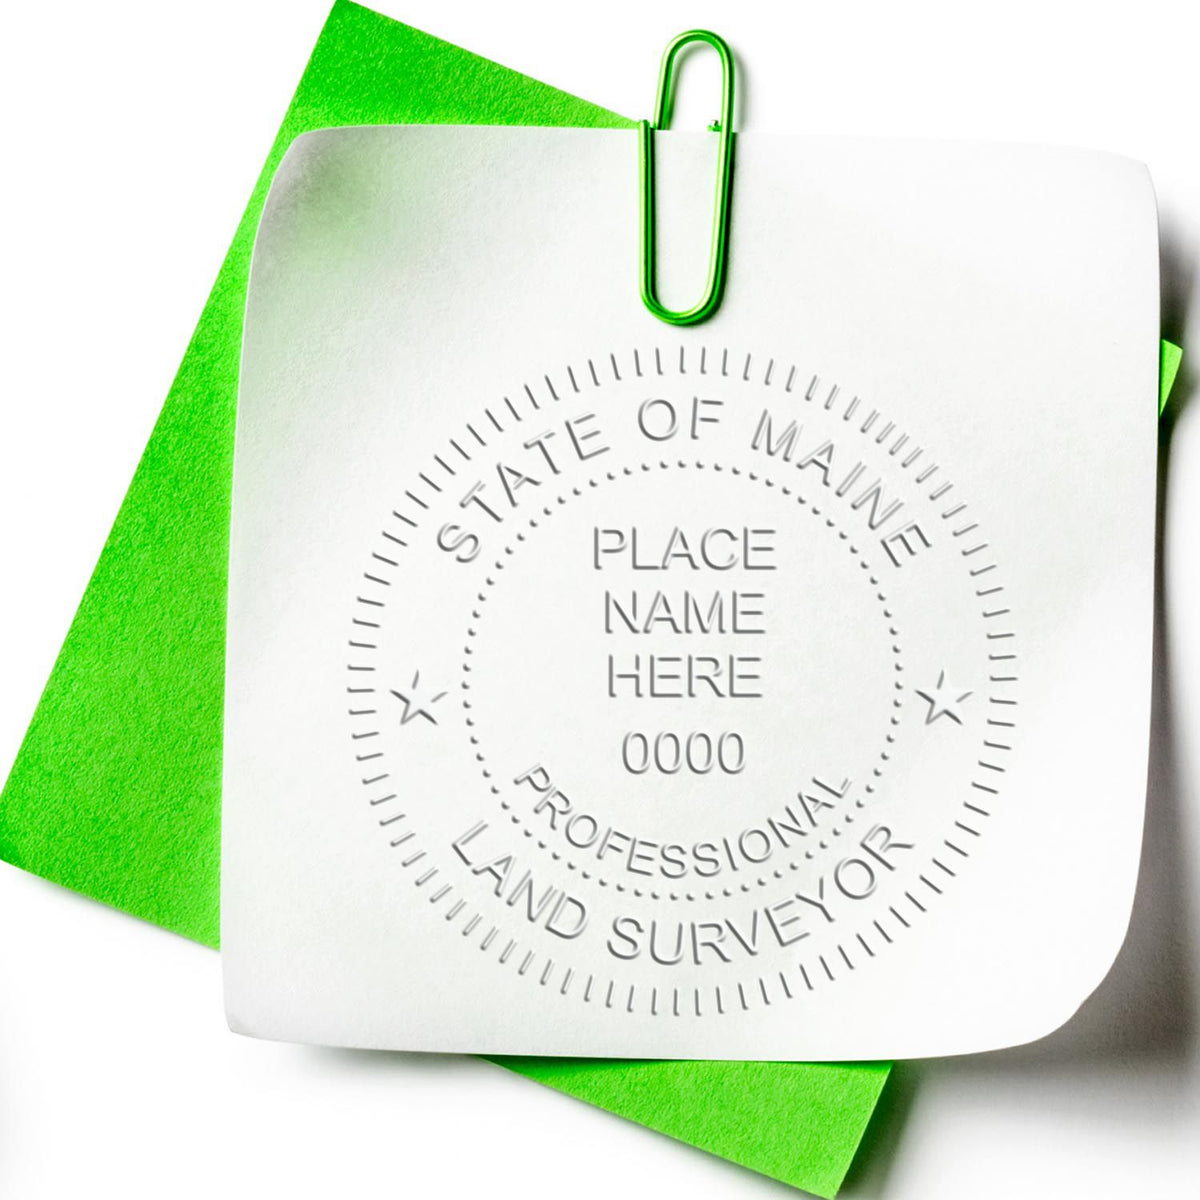 A stamped imprint of the Gift Maine Land Surveyor Seal in this stylish lifestyle photo, setting the tone for a unique and personalized product.